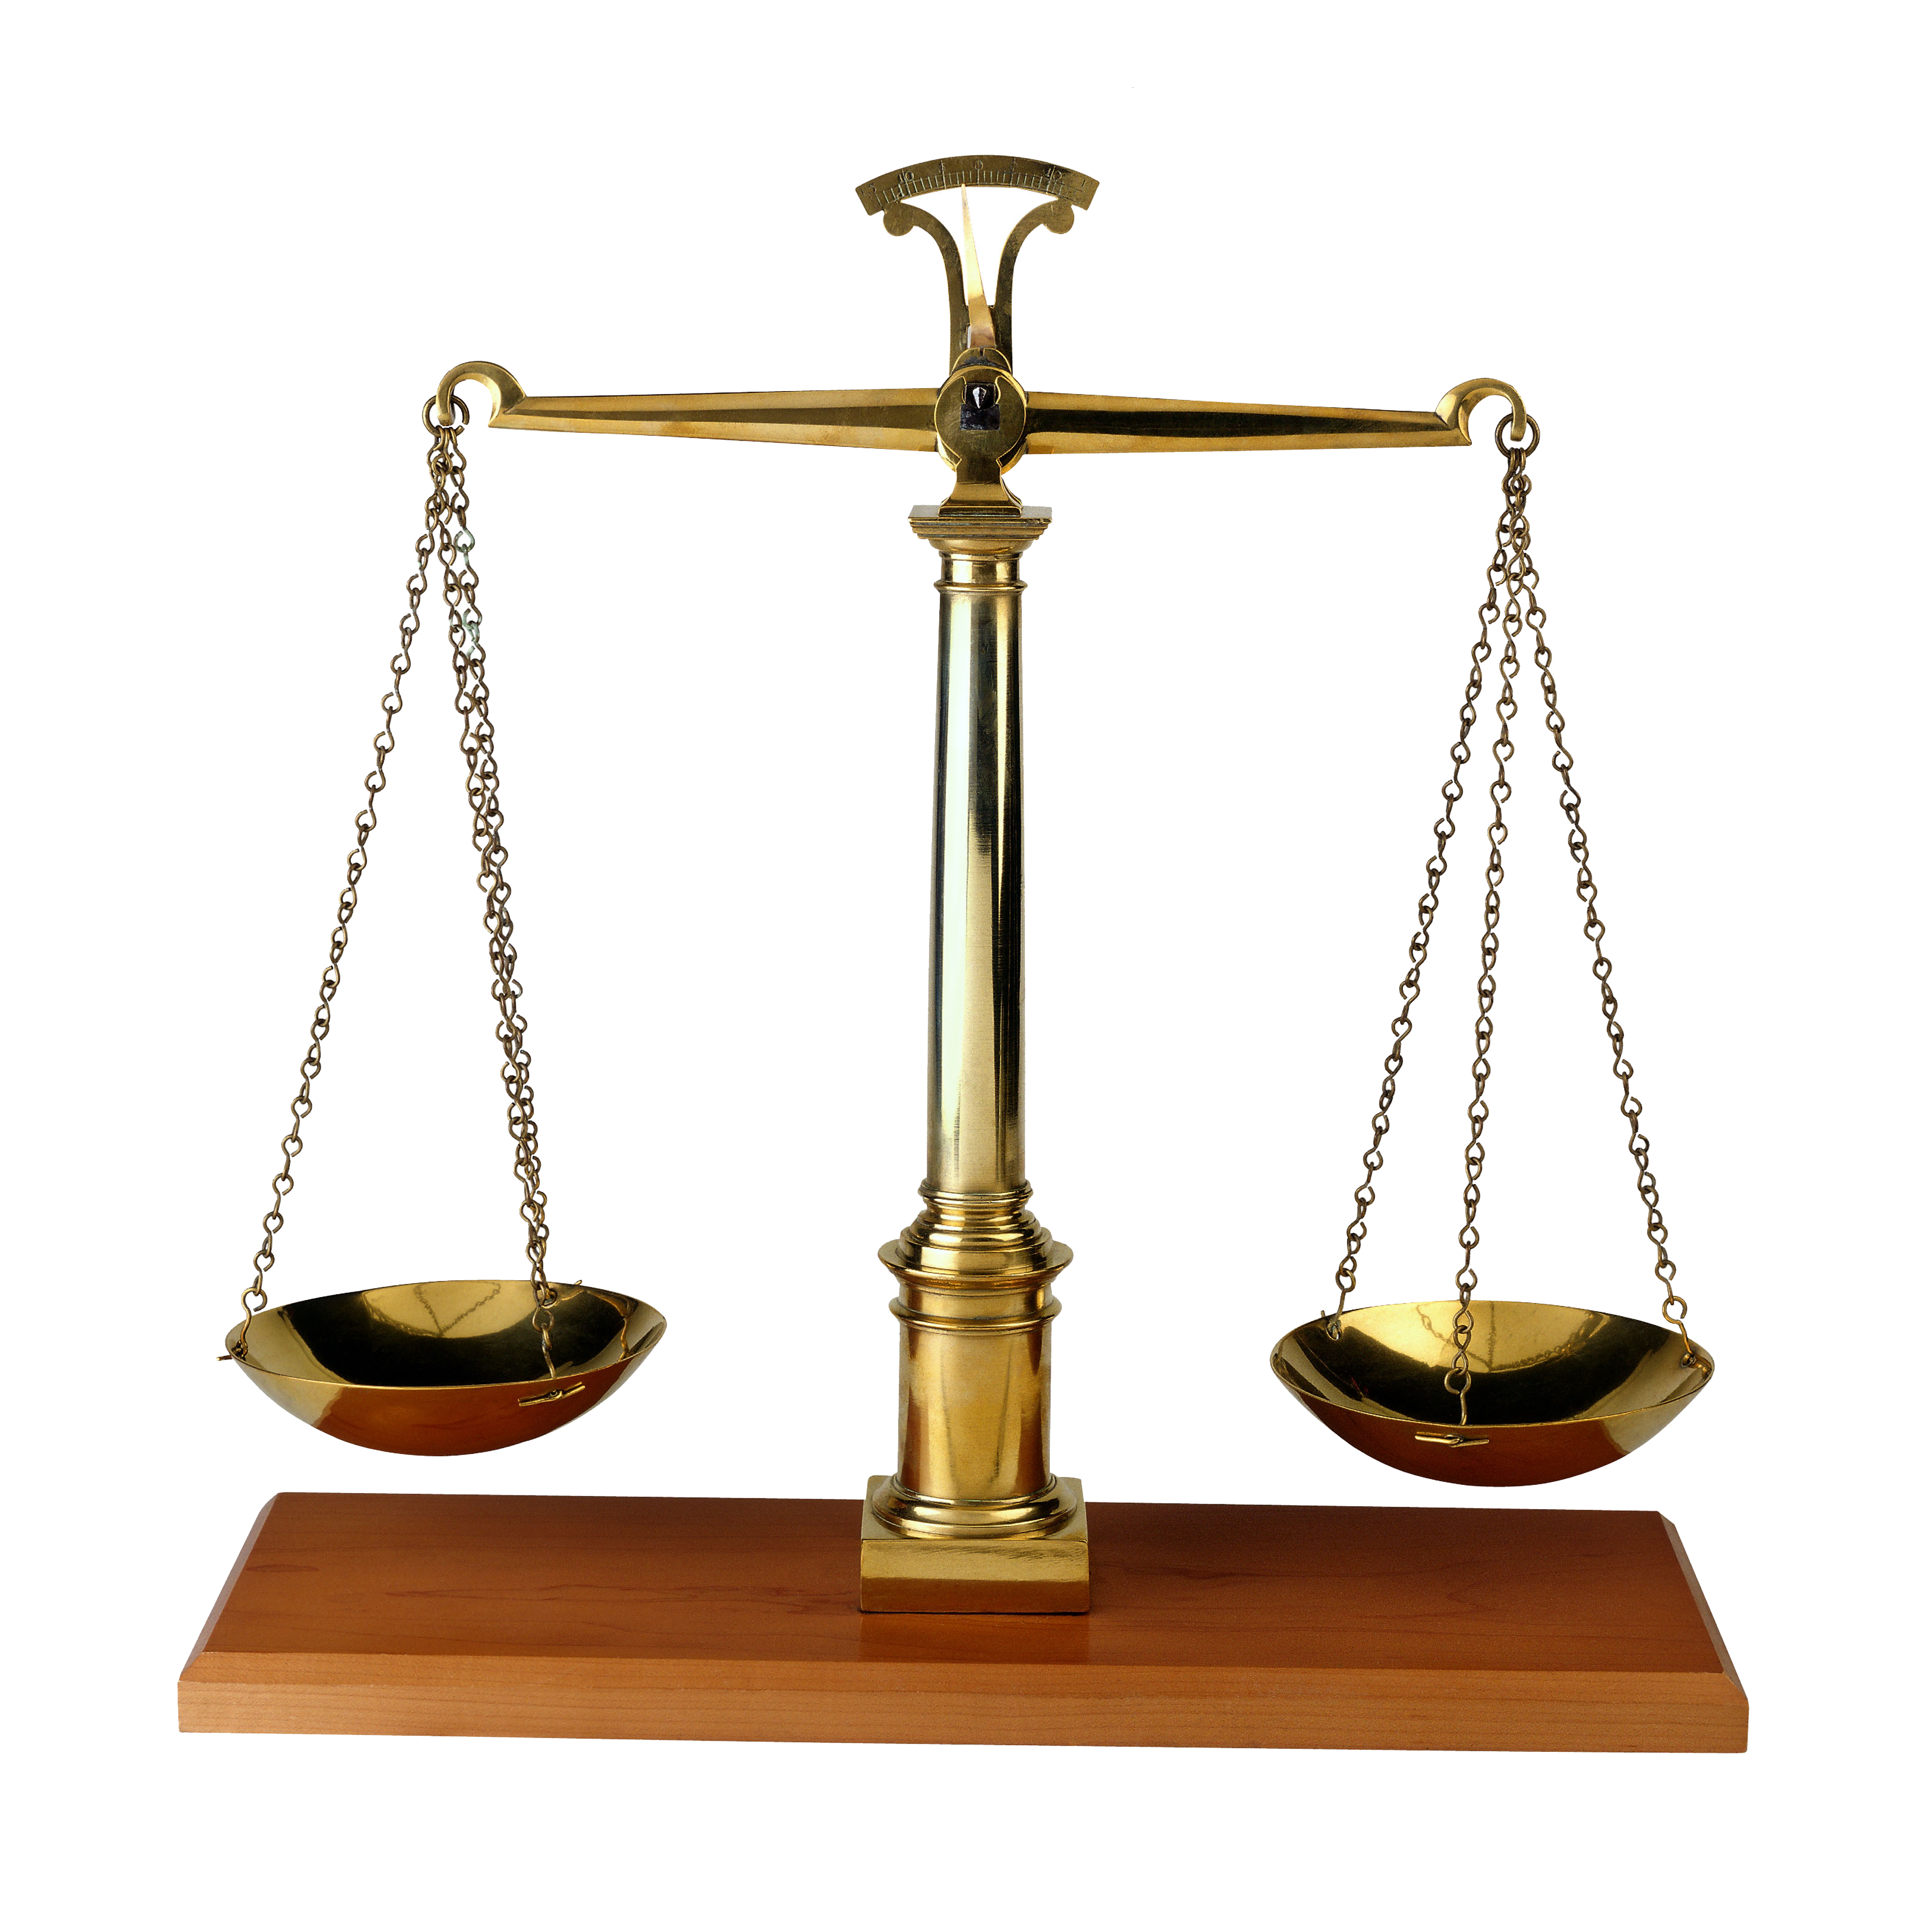 Scale clipart judge scale. Attorney panda free images